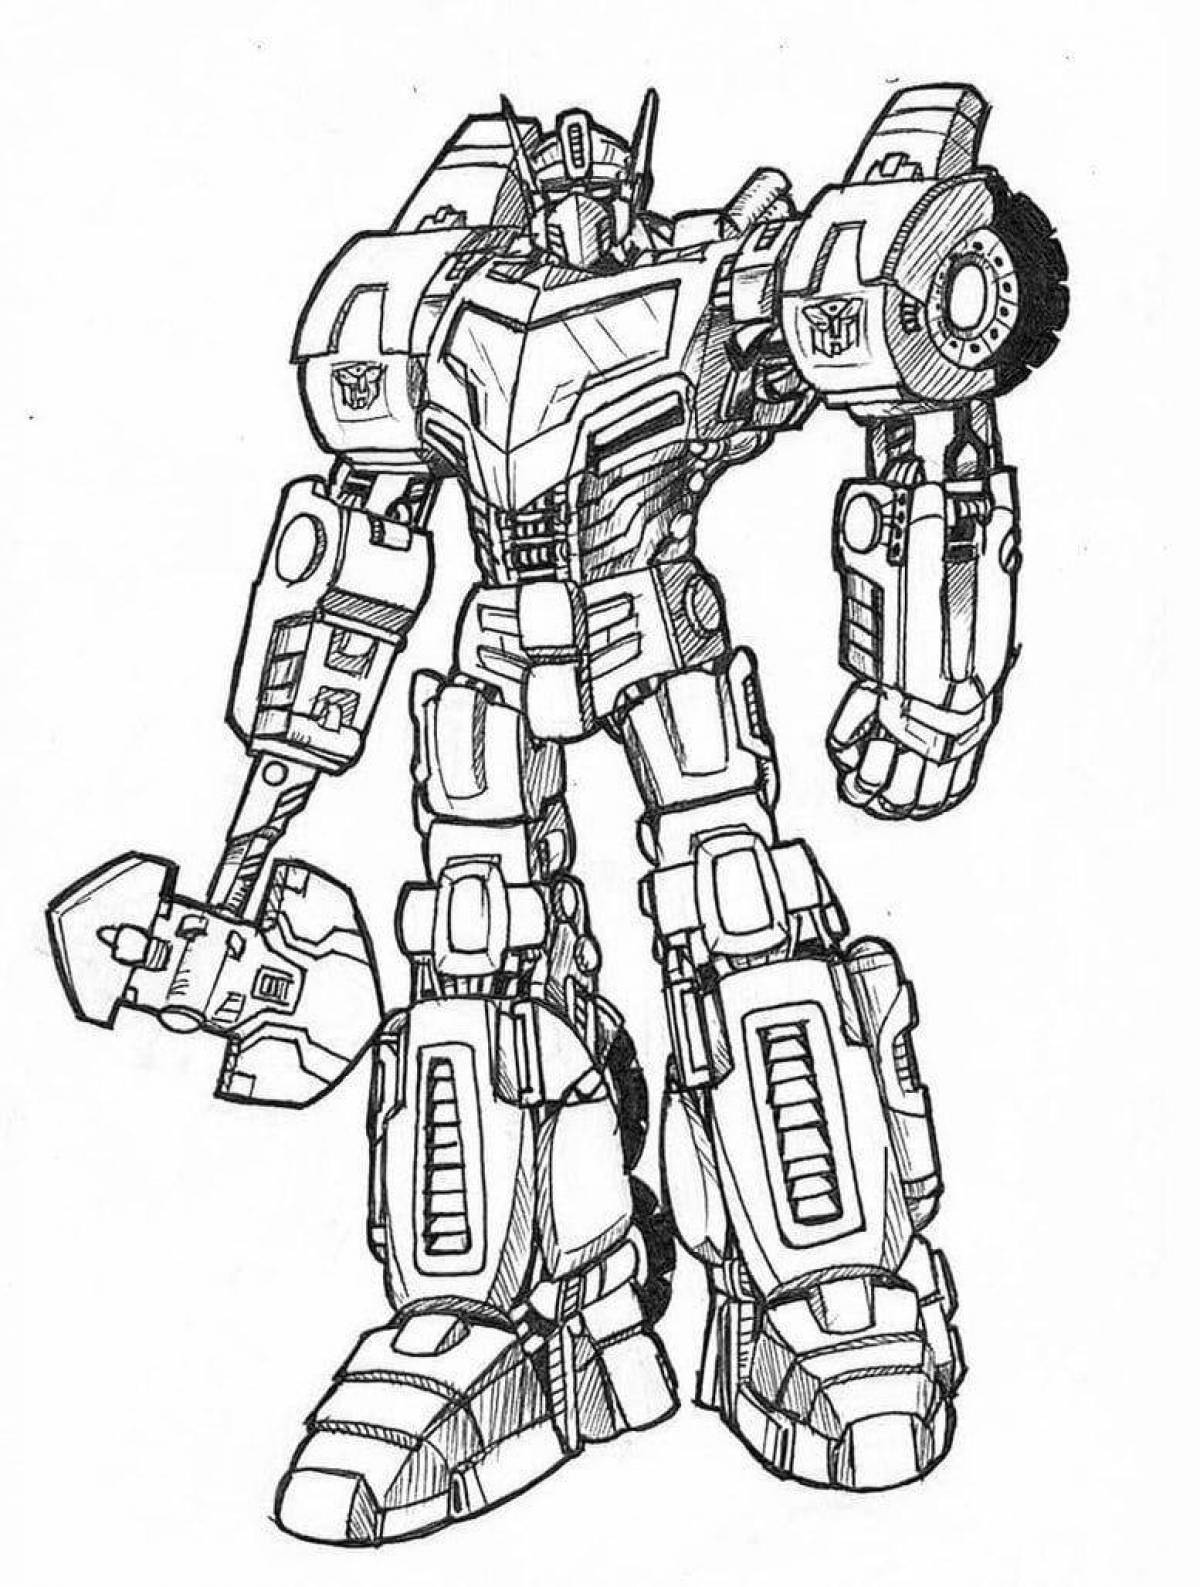 Bumblebee colorful coloring page